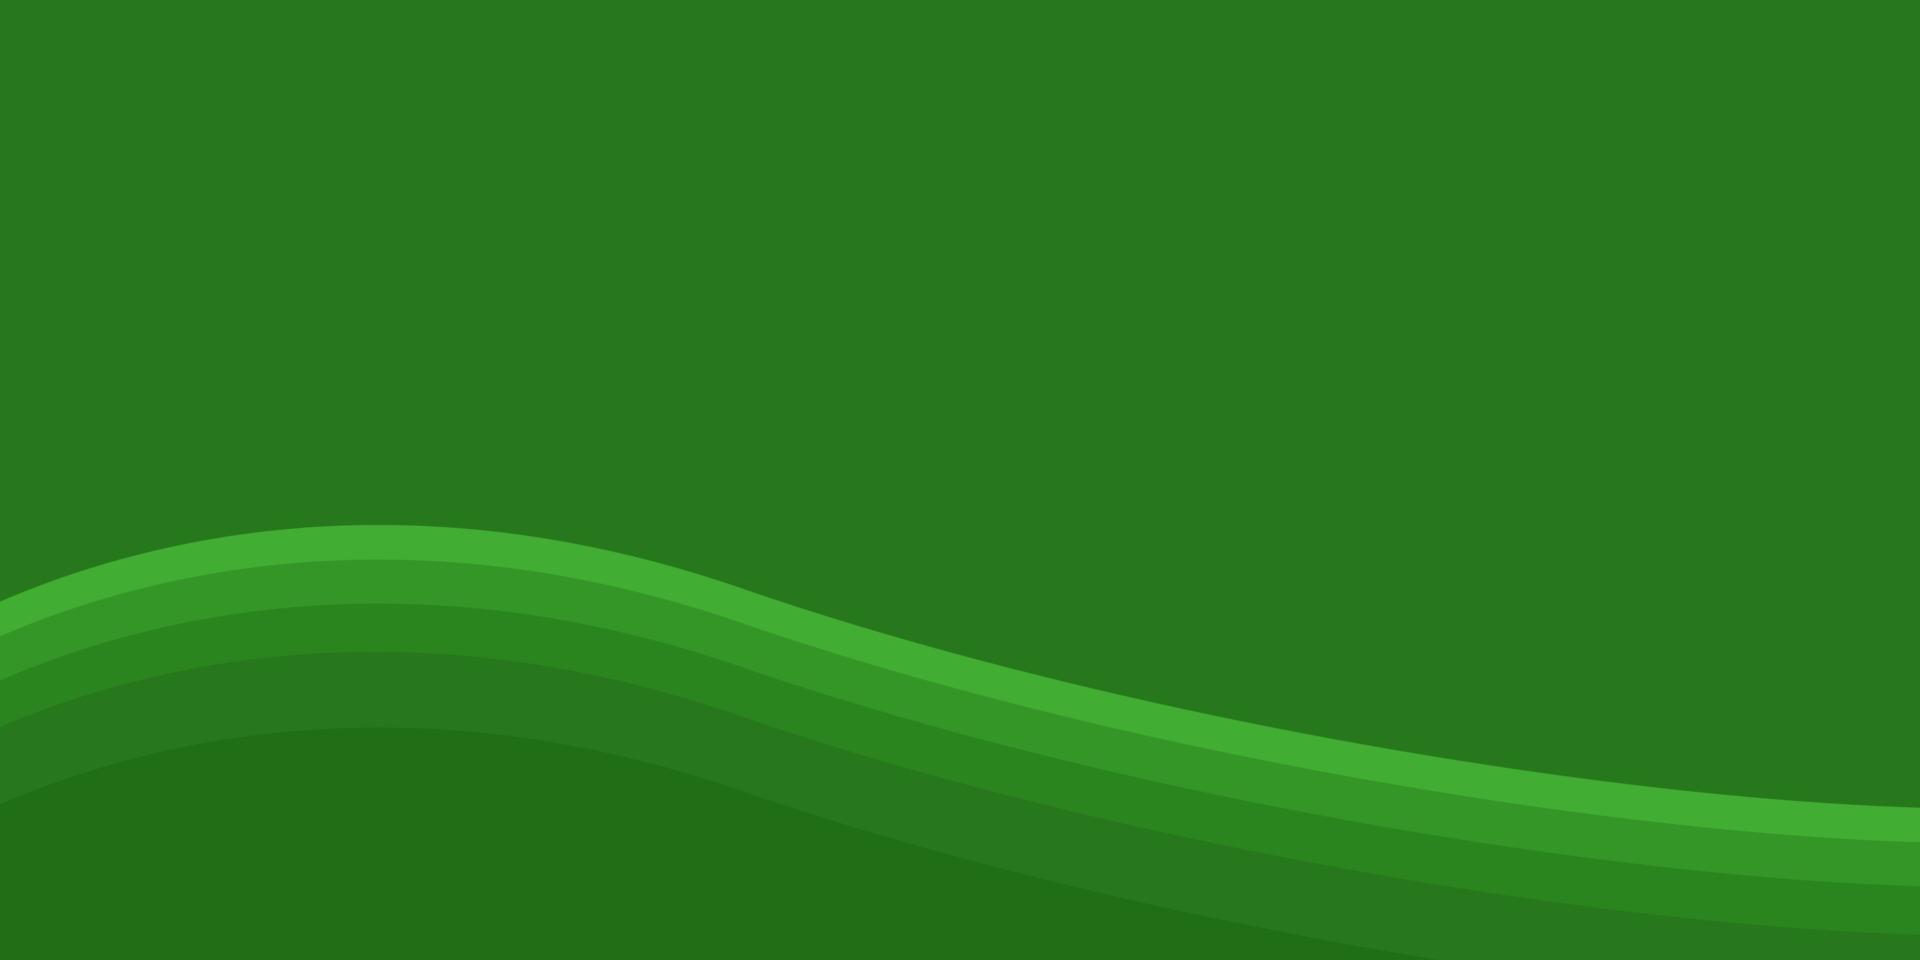 wave green background illustration perfect for banner, poster, banner event vector